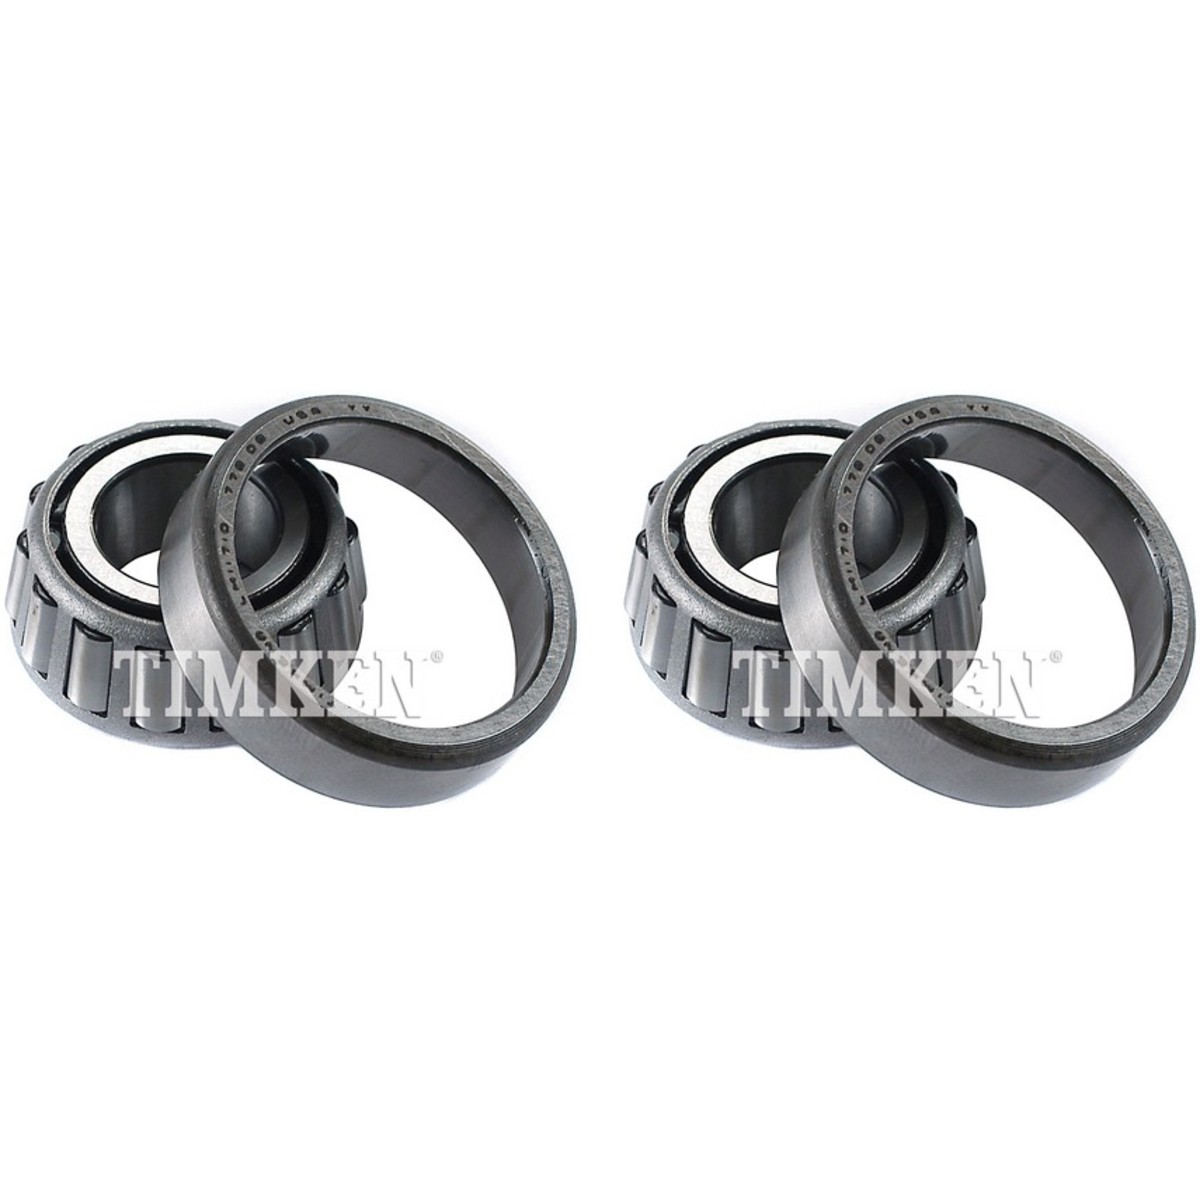 Max 46% OFF SET-TMSET47-2 Timken Set of Fees free!! 2 Rea Differential or Front Bearings